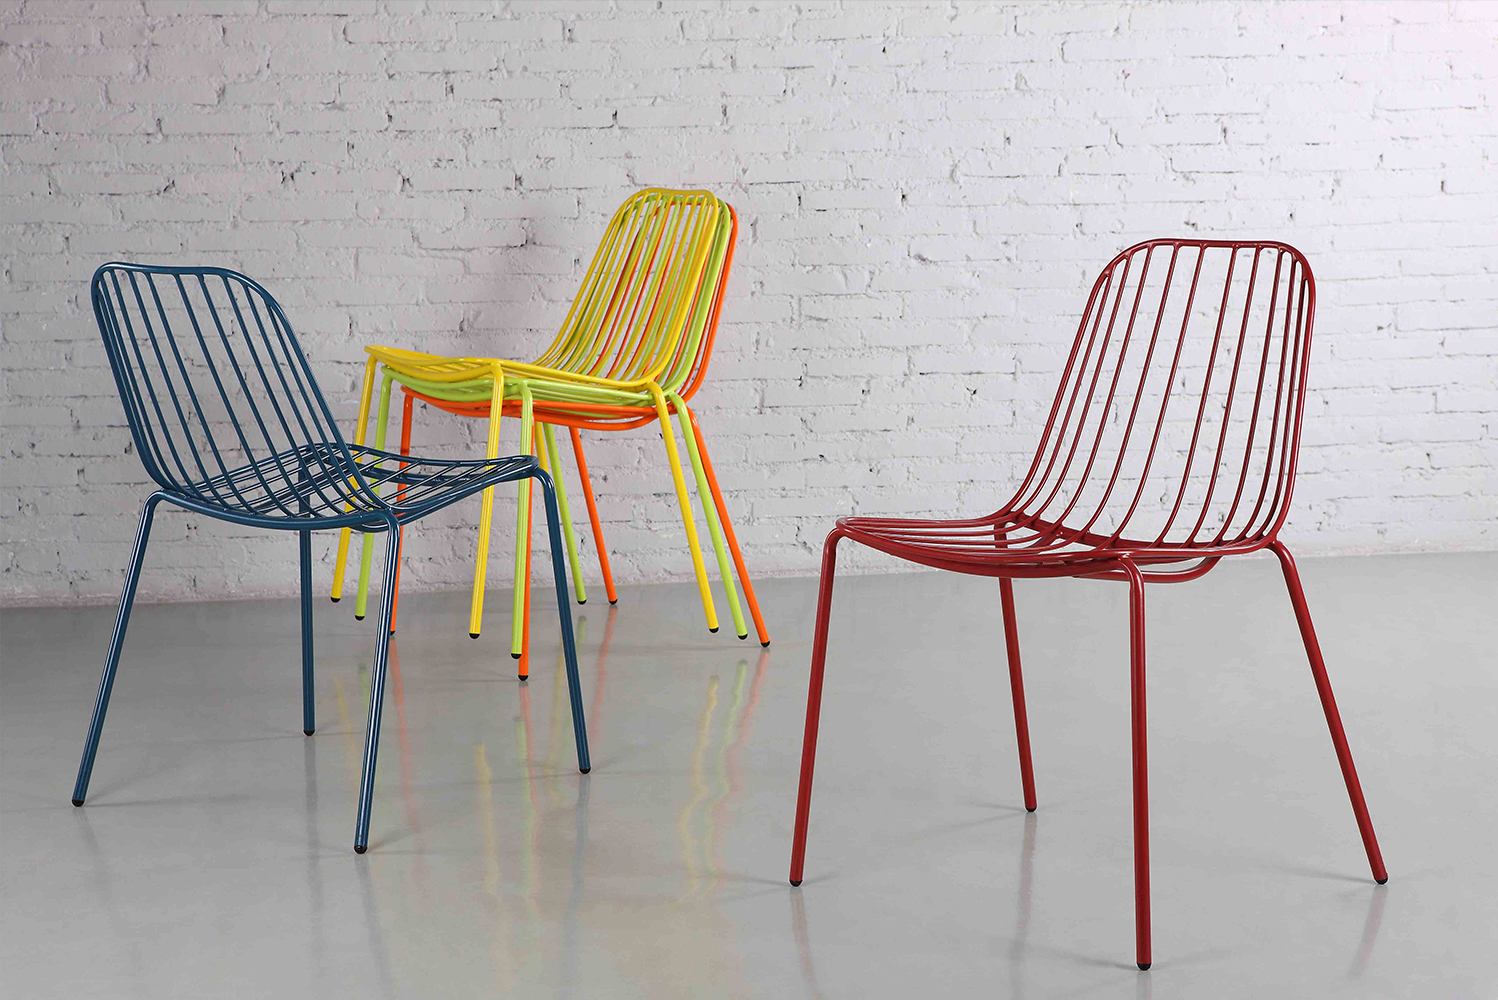 Introducing the Resonate chair from mad Furniture Design 